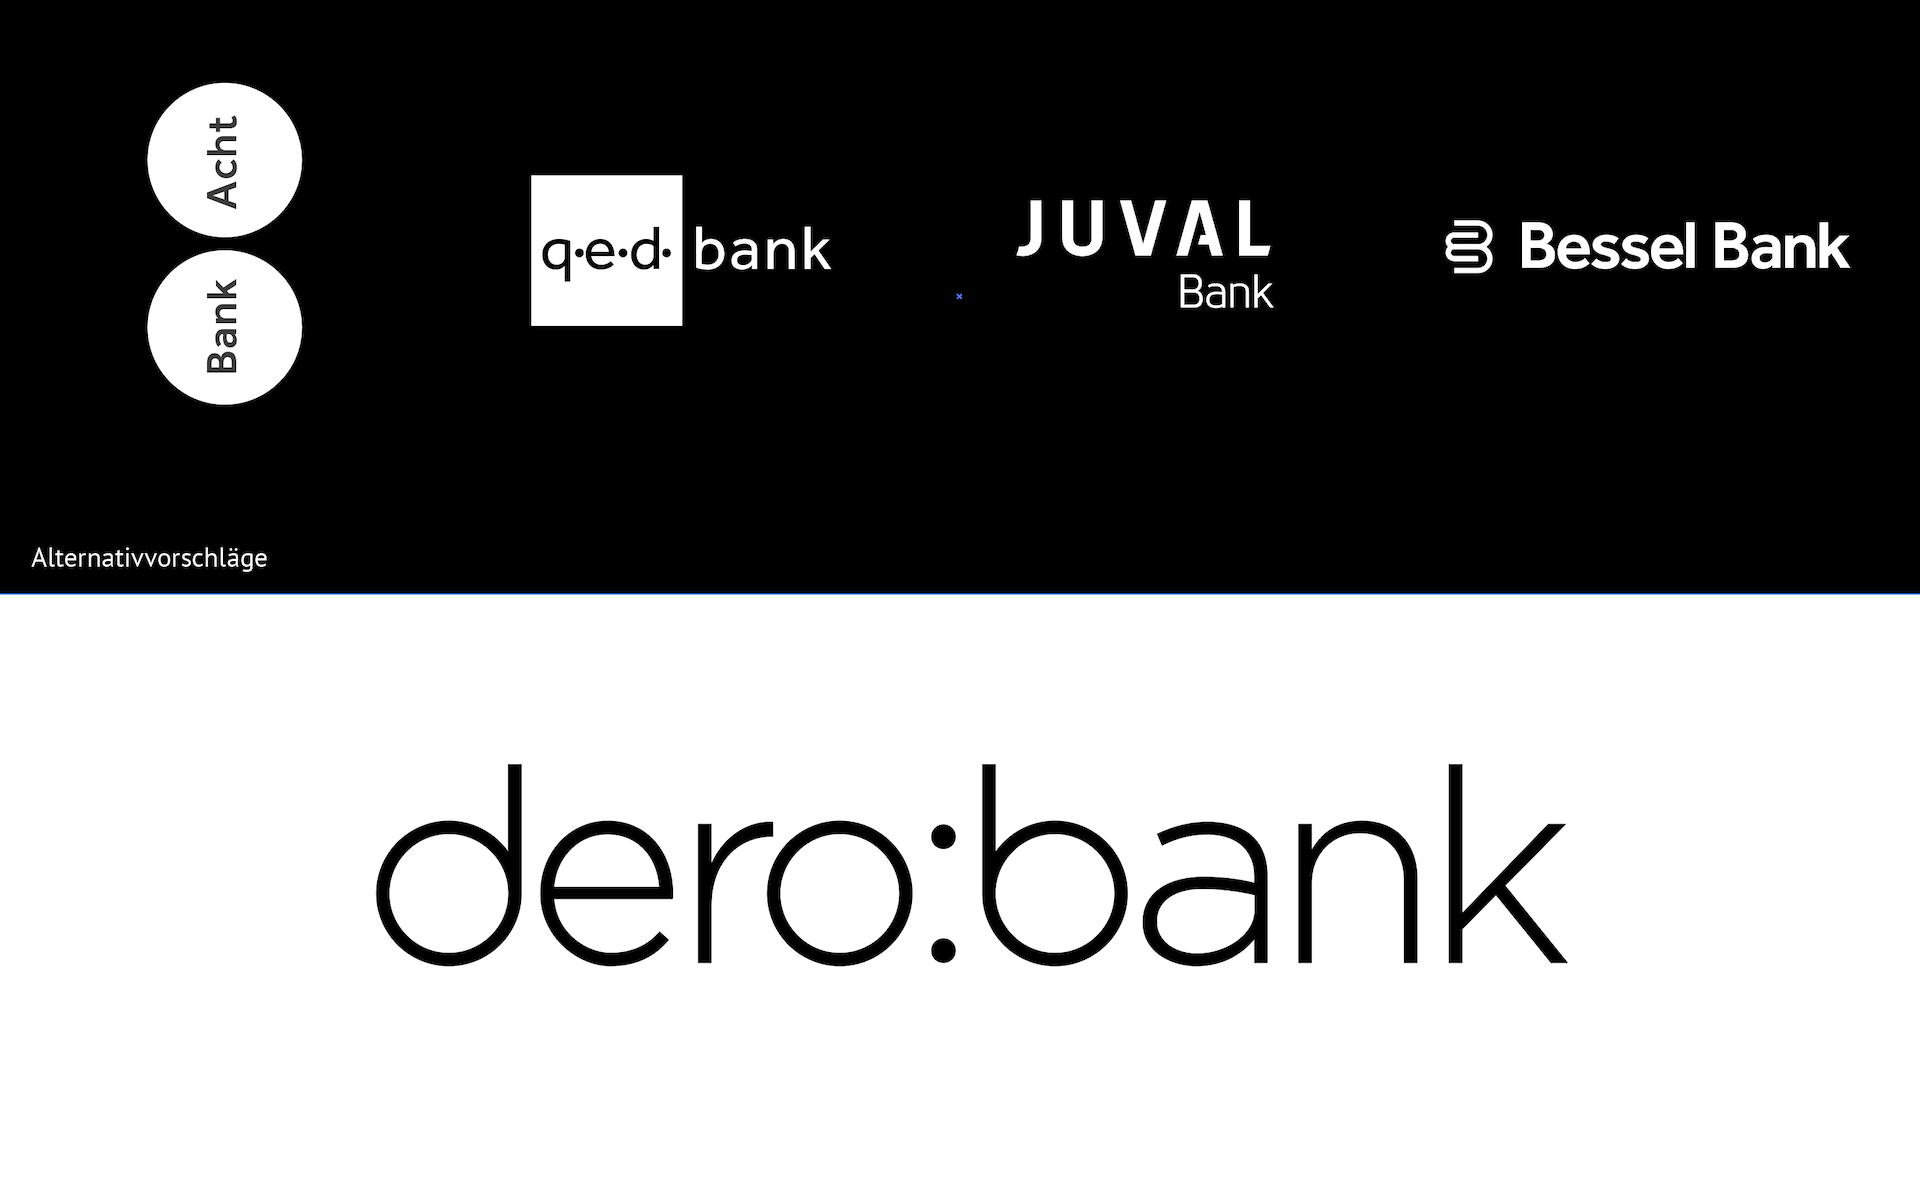 Example of alternatives for Dero:banks name: Bank Acht, QED Bank, Juval Bank, Bessel Bank